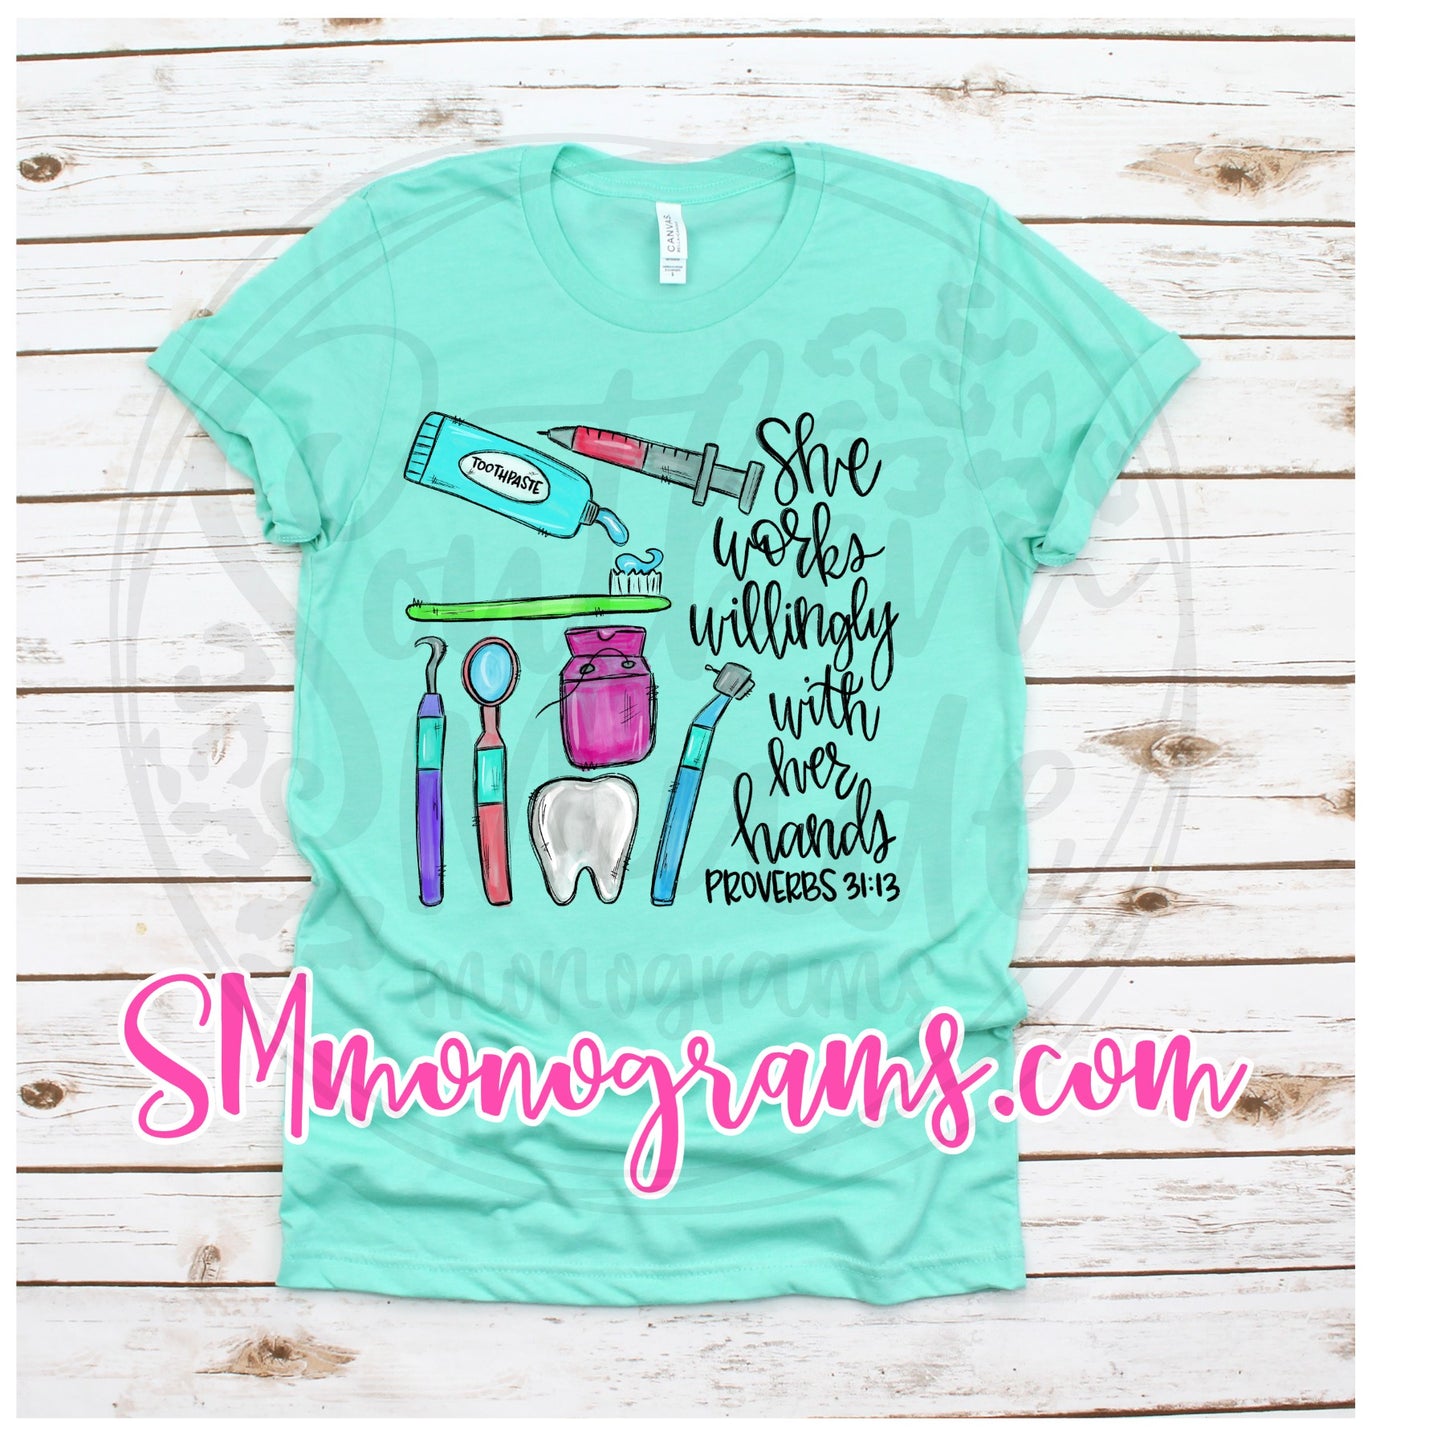 Dental Hygienist - She Works Willingly With Her Hands Proverbs 31:13 - Tee, Tank or Raglan